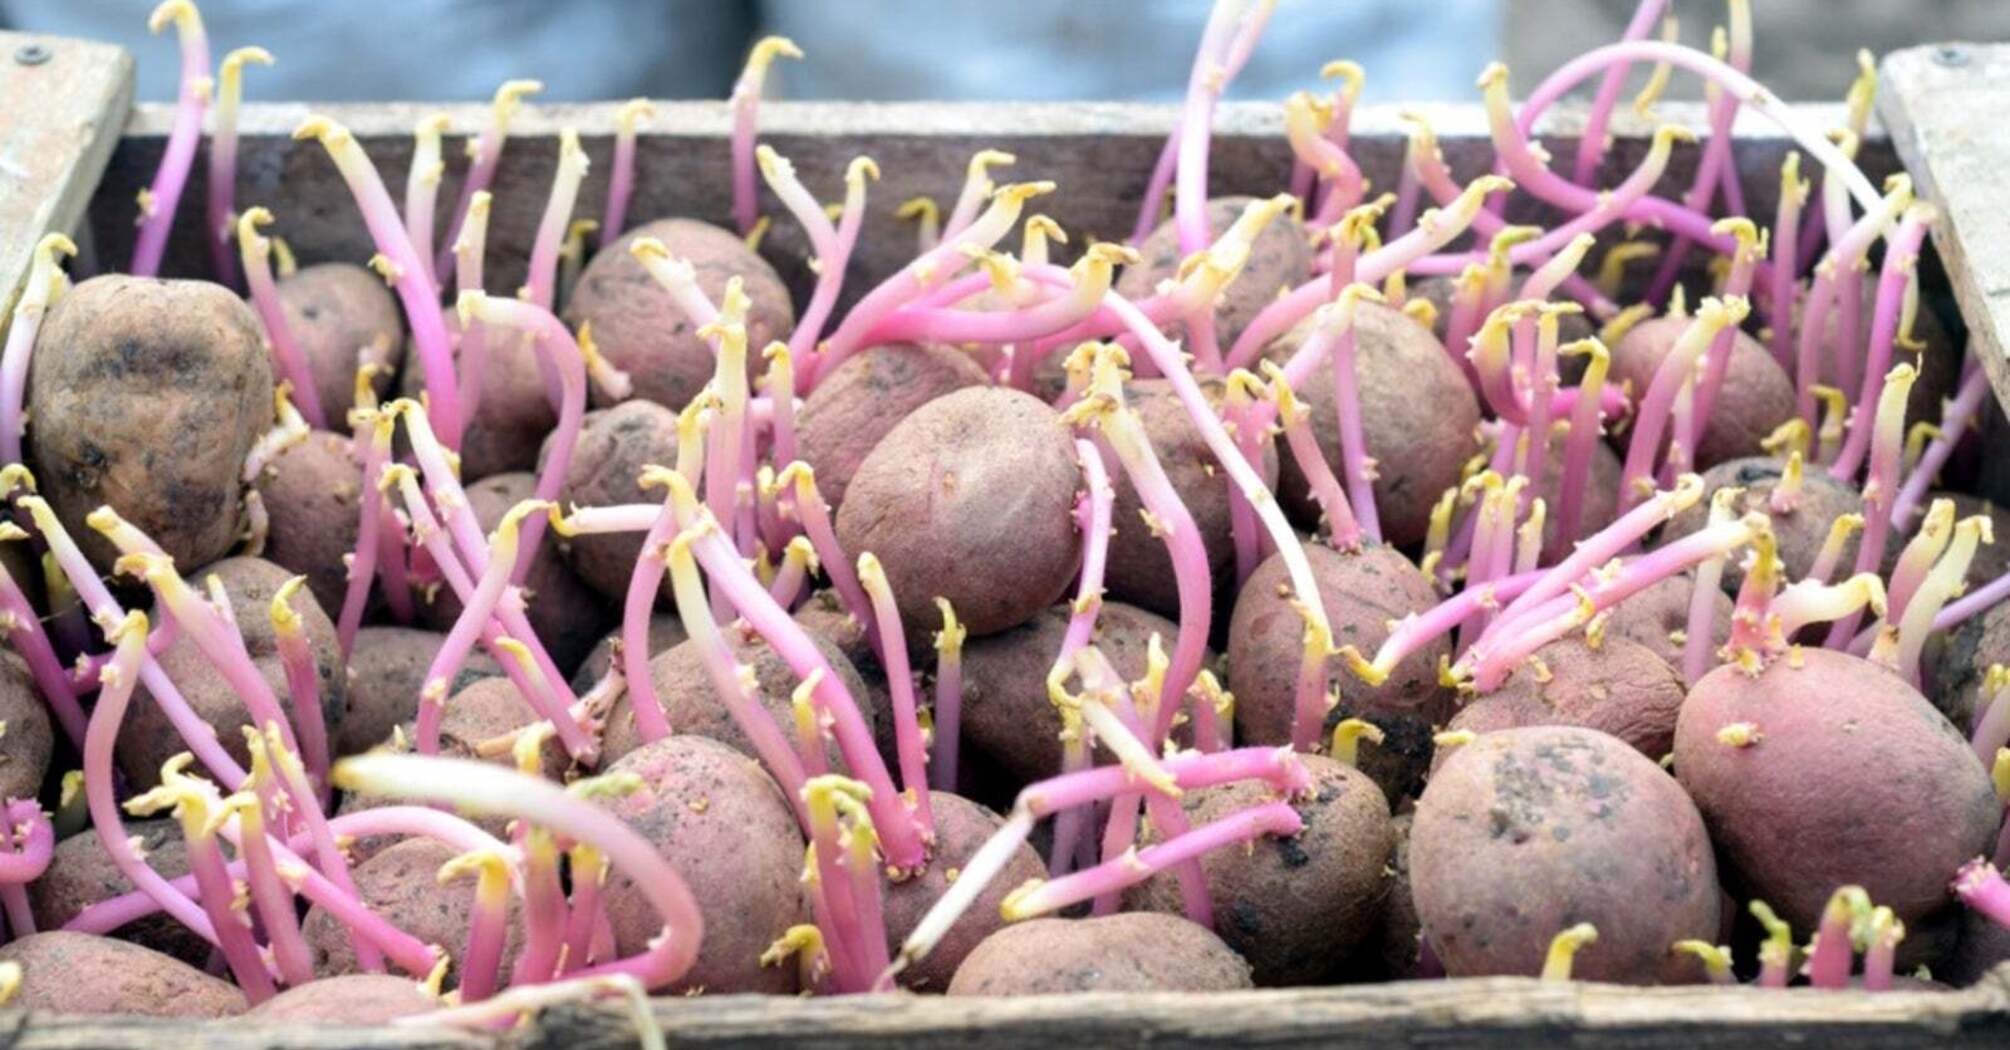 What to treat potatoes with before planting